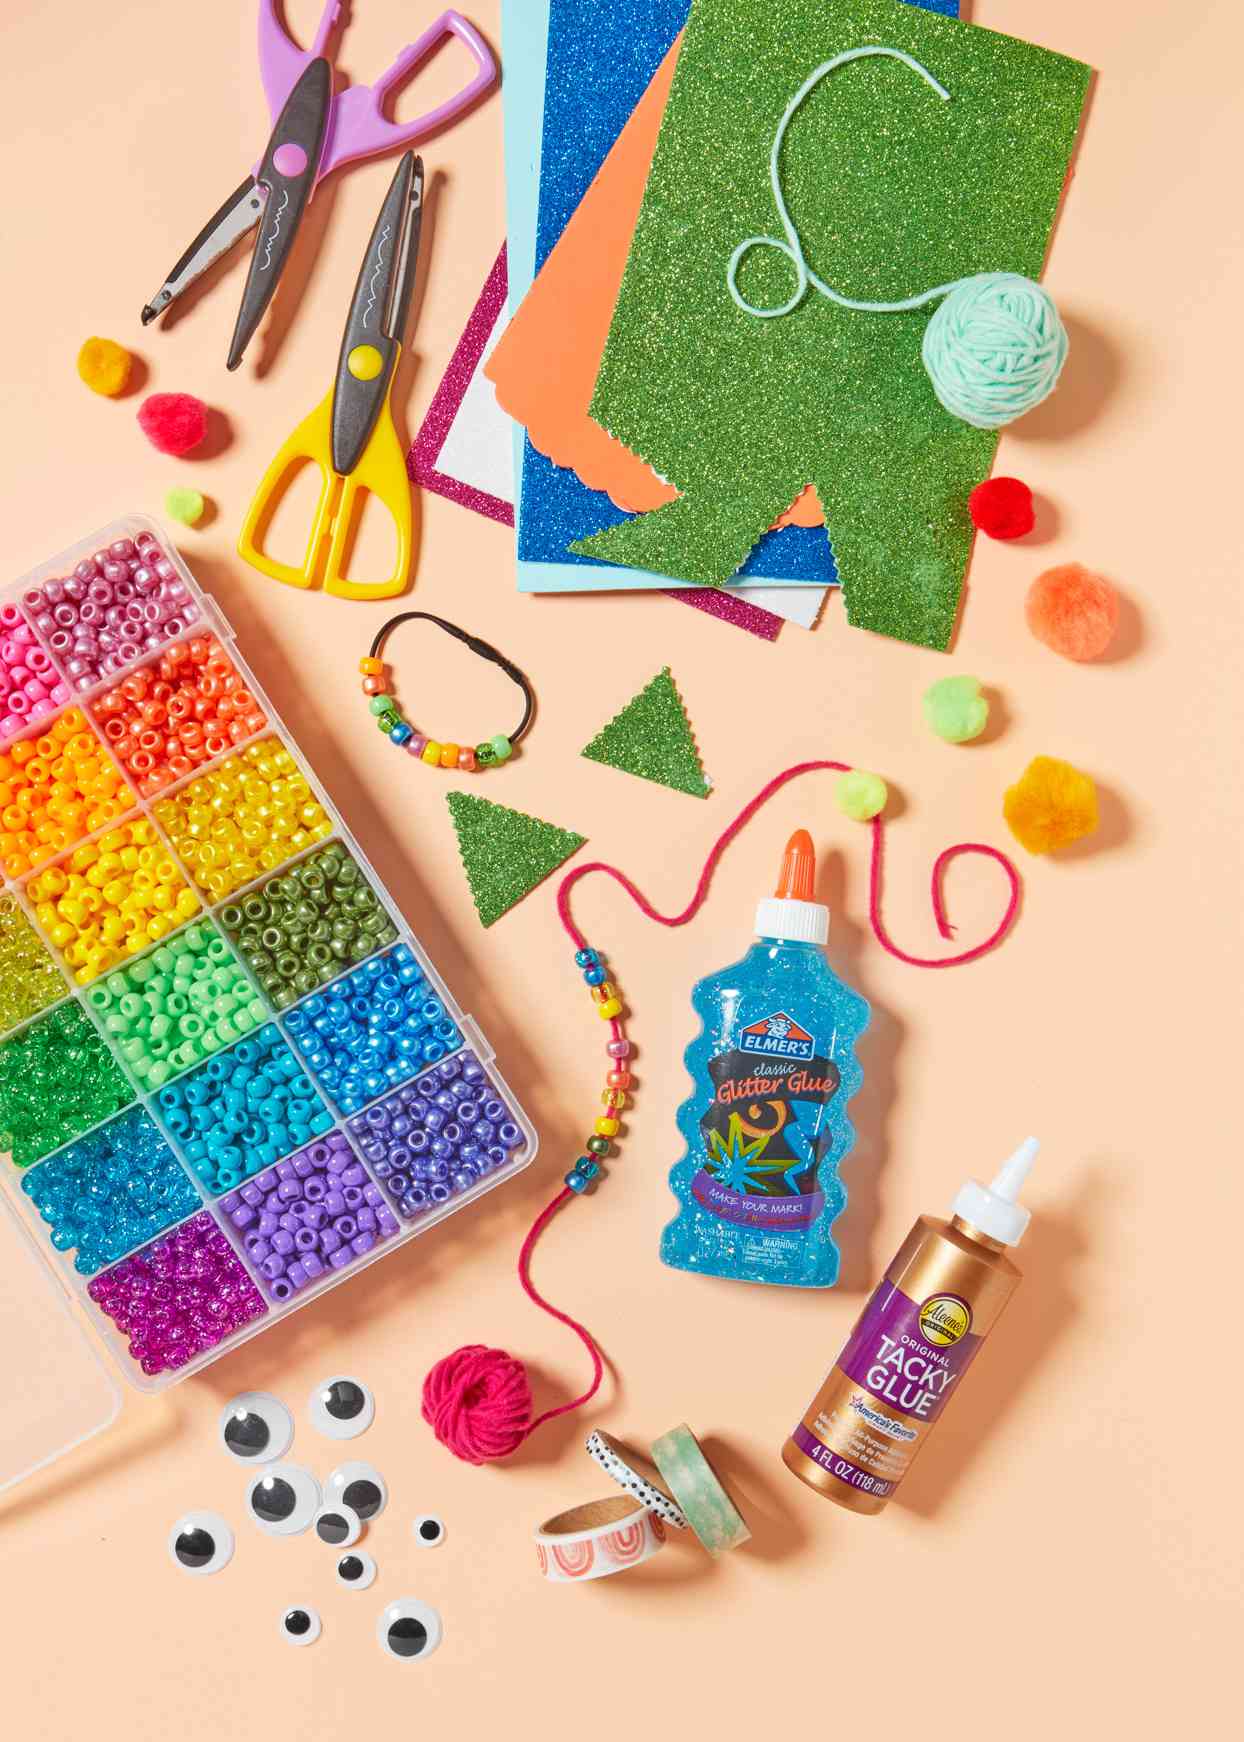 bracelet making supplies and glitter construction paper